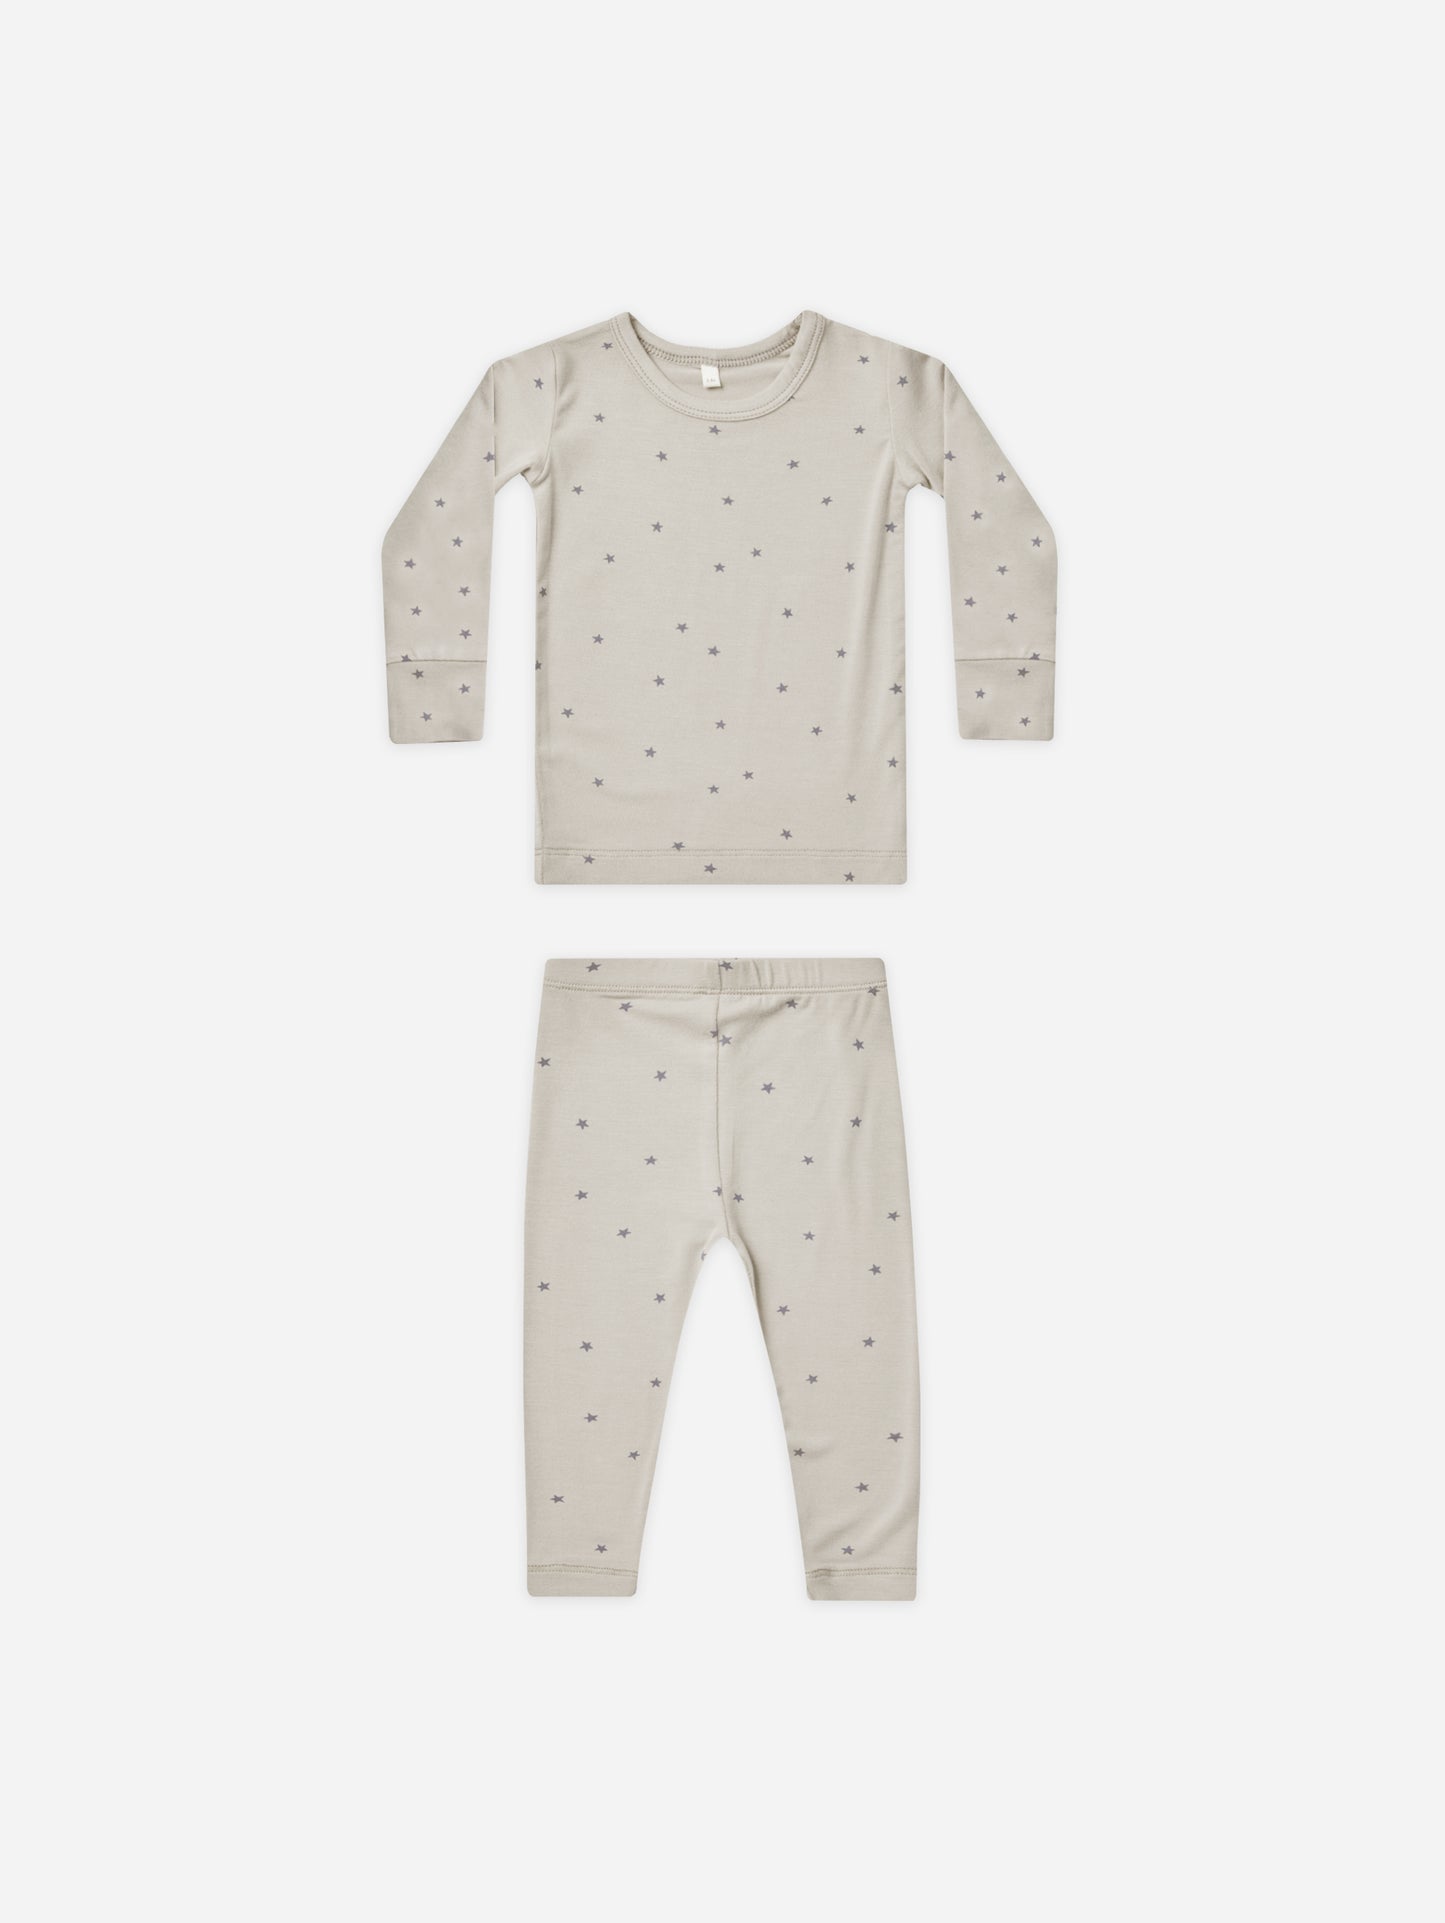 Bamboo Long Sleeve Pajama Set || Stars - Rylee + Cru | Kids Clothes | Trendy Baby Clothes | Modern Infant Outfits |